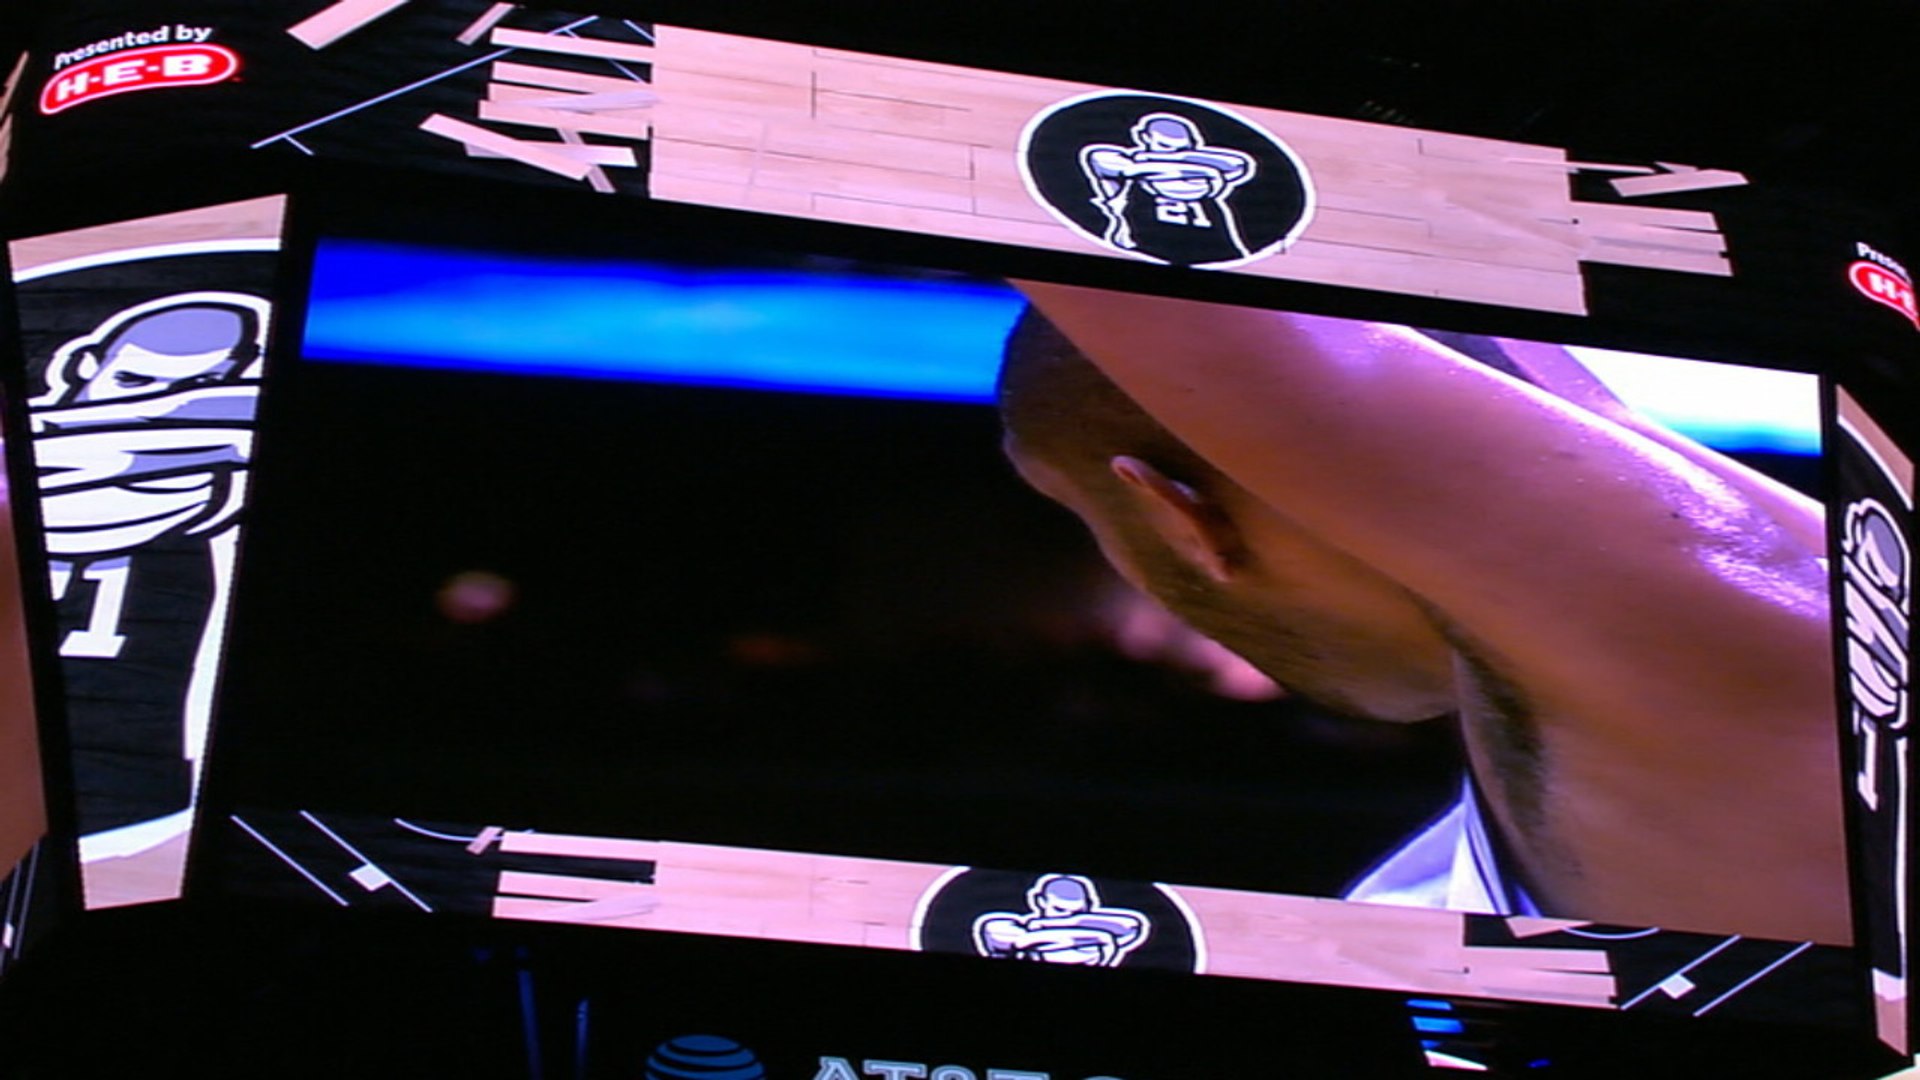 The stories the Spurs' retired jerseys tell